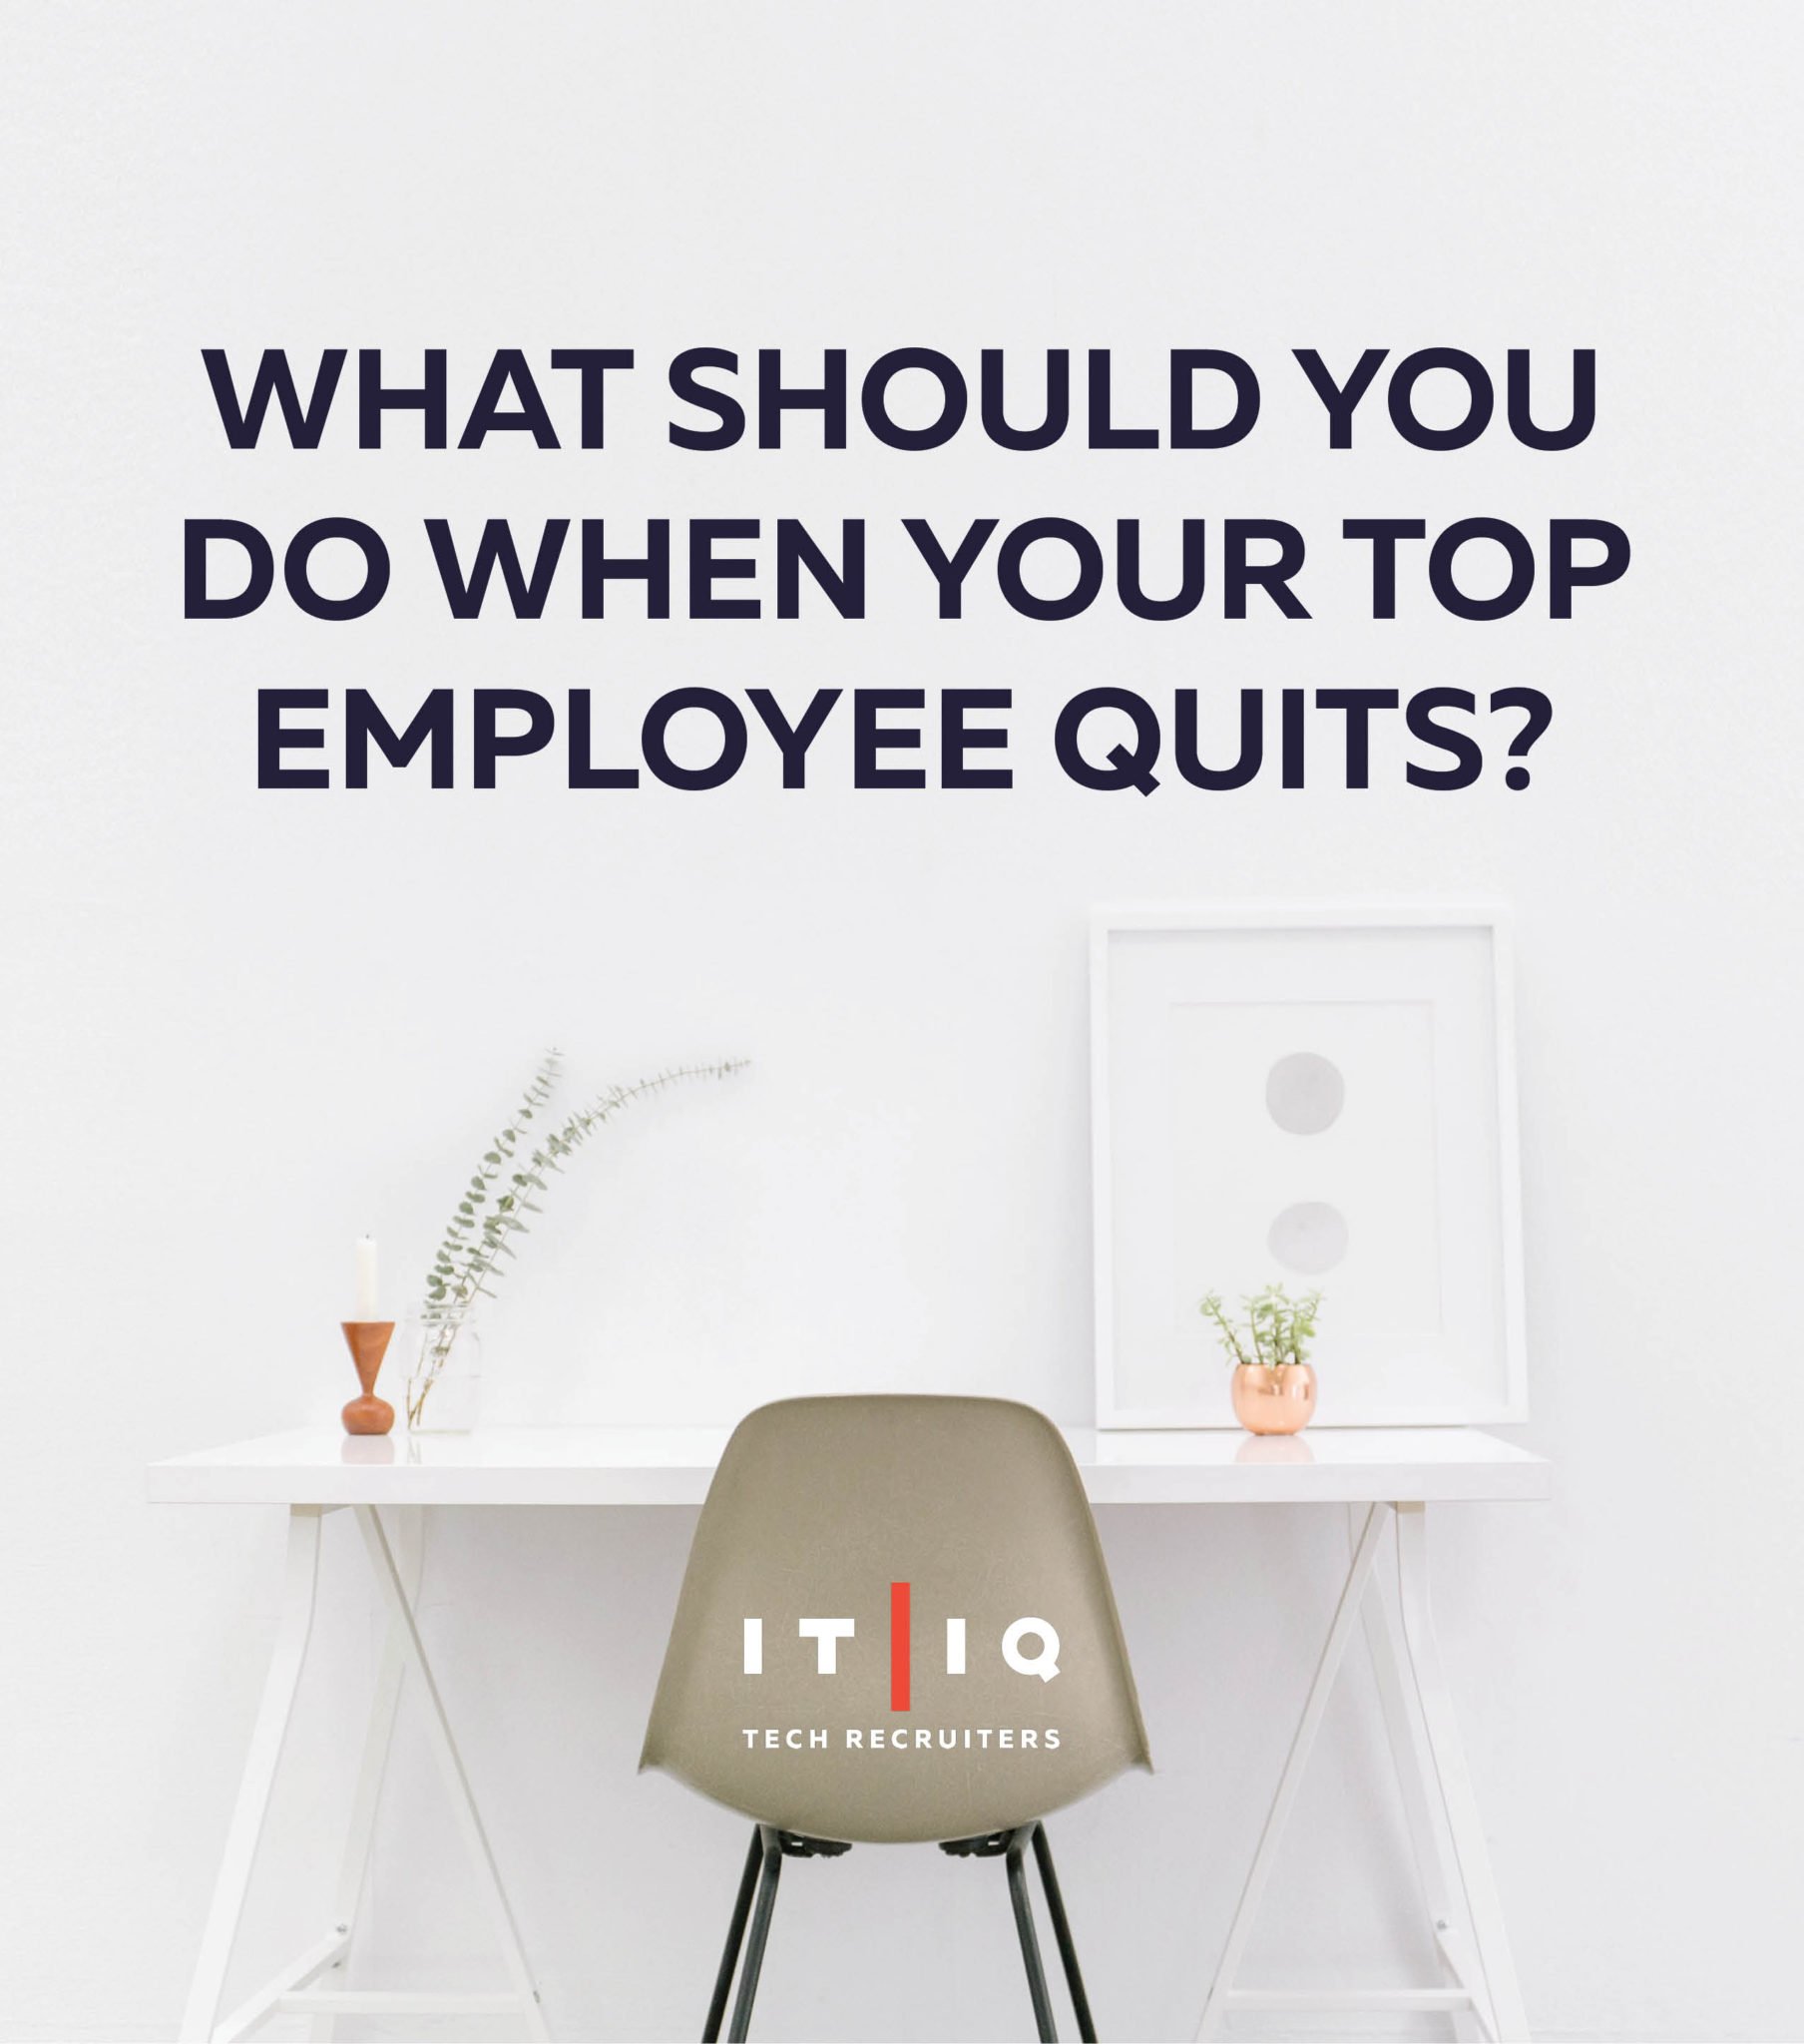 IT/IQ Tech Recruiter Employee Retention "what to do when your employee quits" Graphic